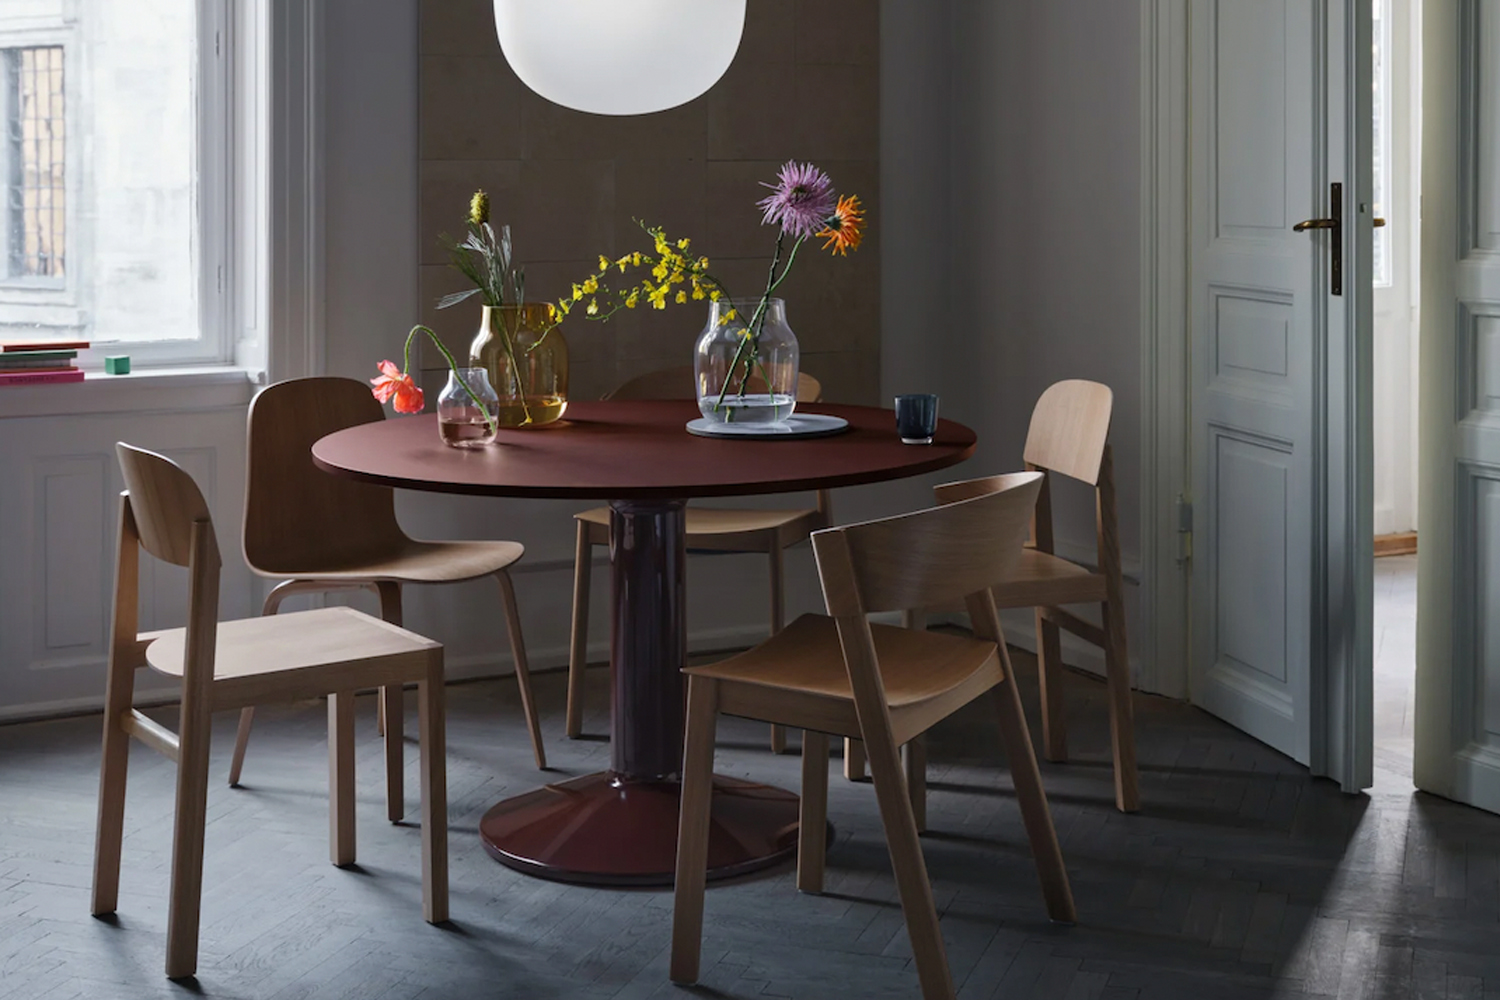 10 Easy Pieces The Scandinavian Dining Chair portrait 3